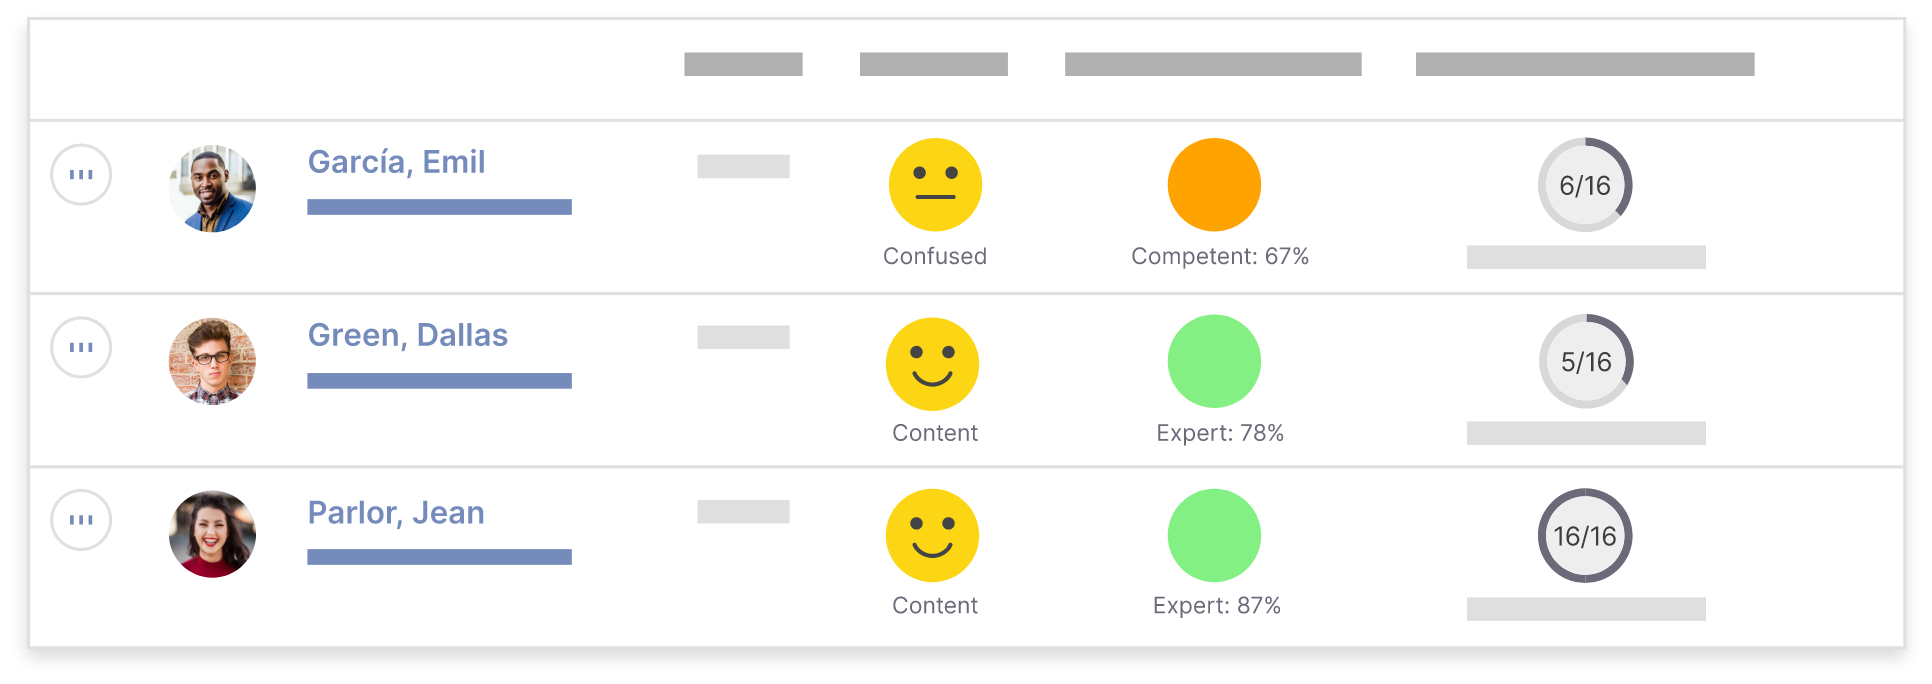 Mockup of a Realizeit panel with smiley faces showing student progress analytics